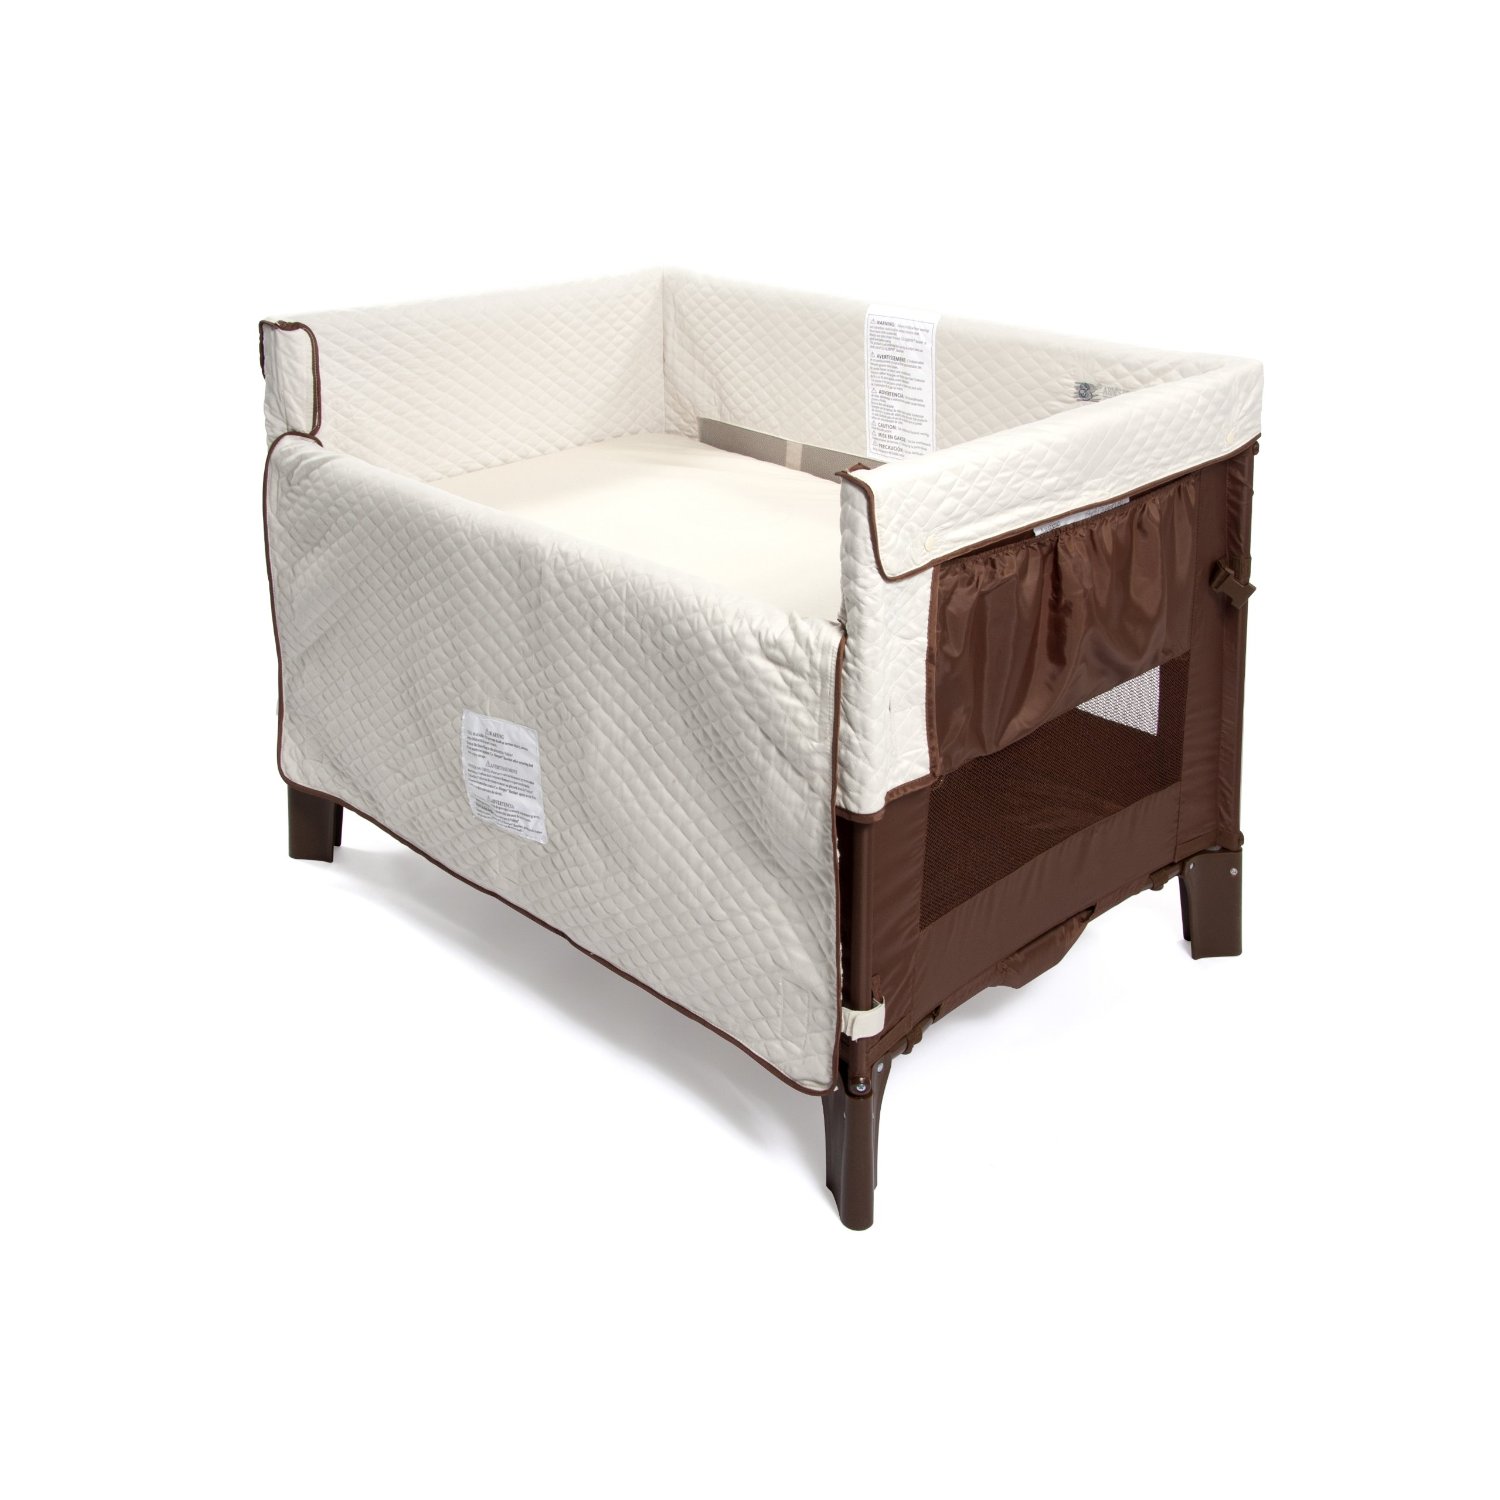 Babies And Babycare: The Arm’s Reach Co-Sleeper Original Bassinet Review